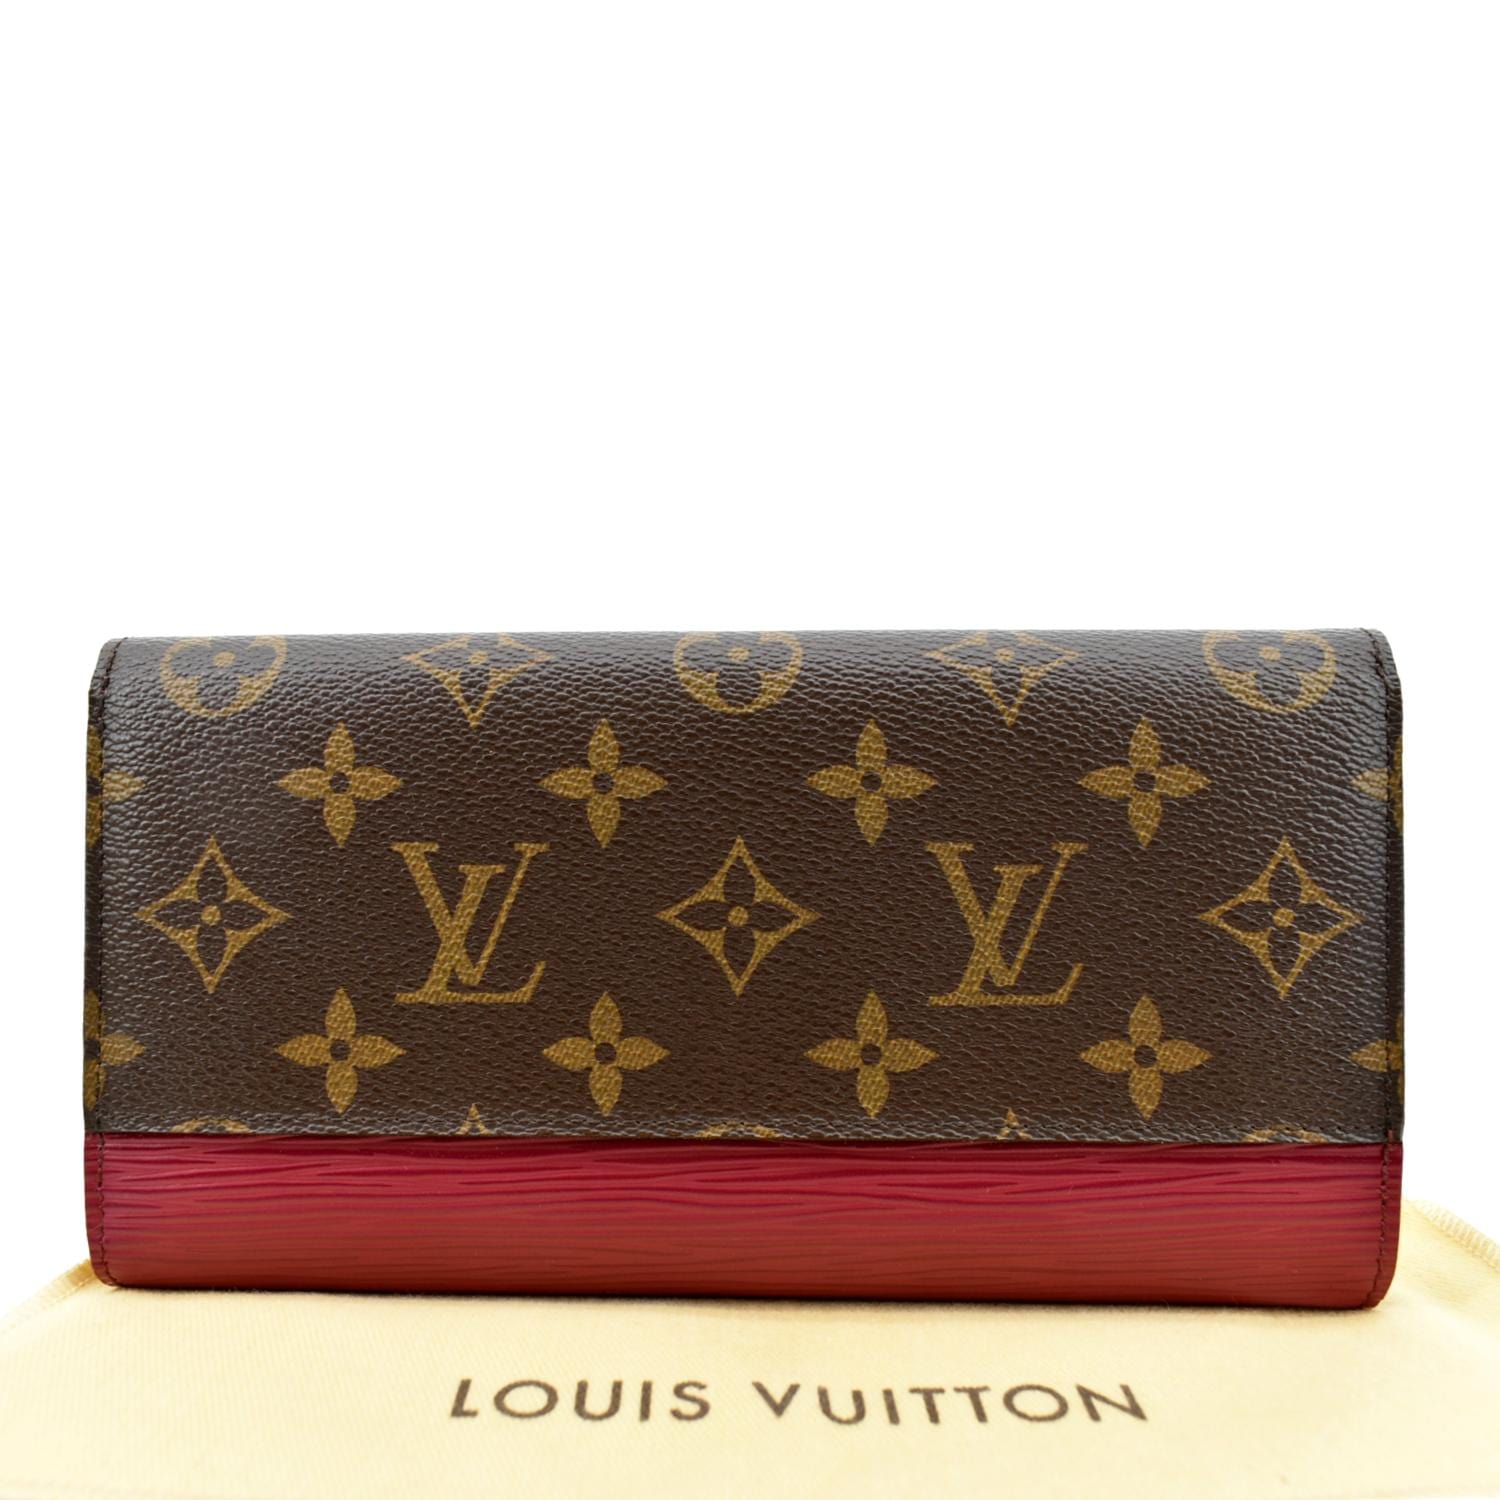 Lv Phone Case With Card Holder Deals, SAVE 49